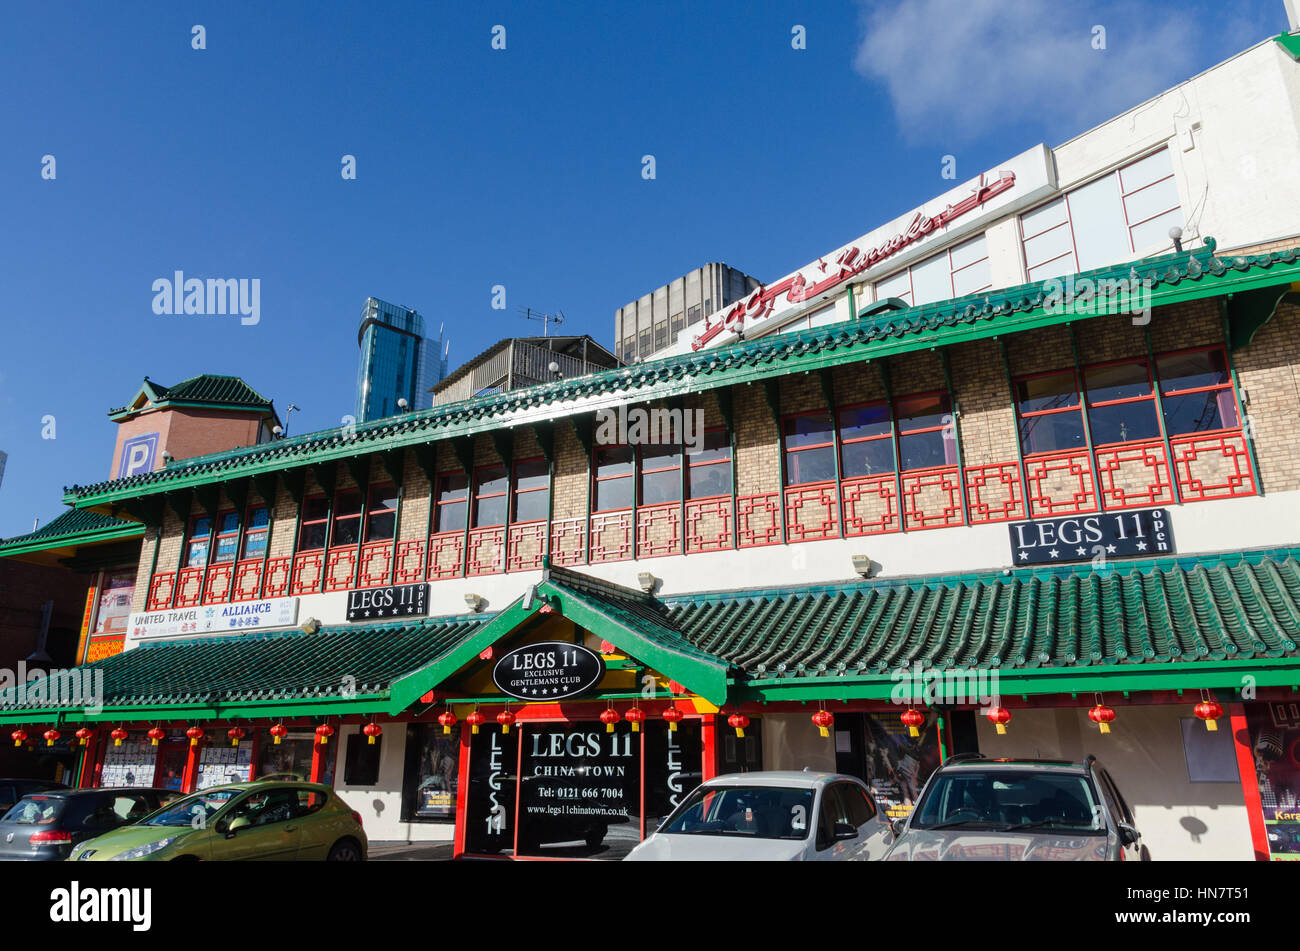 Chinese-style pagoda building in Birmingham's chinese quarter which houses Legs 11 nightclub Stock Photo